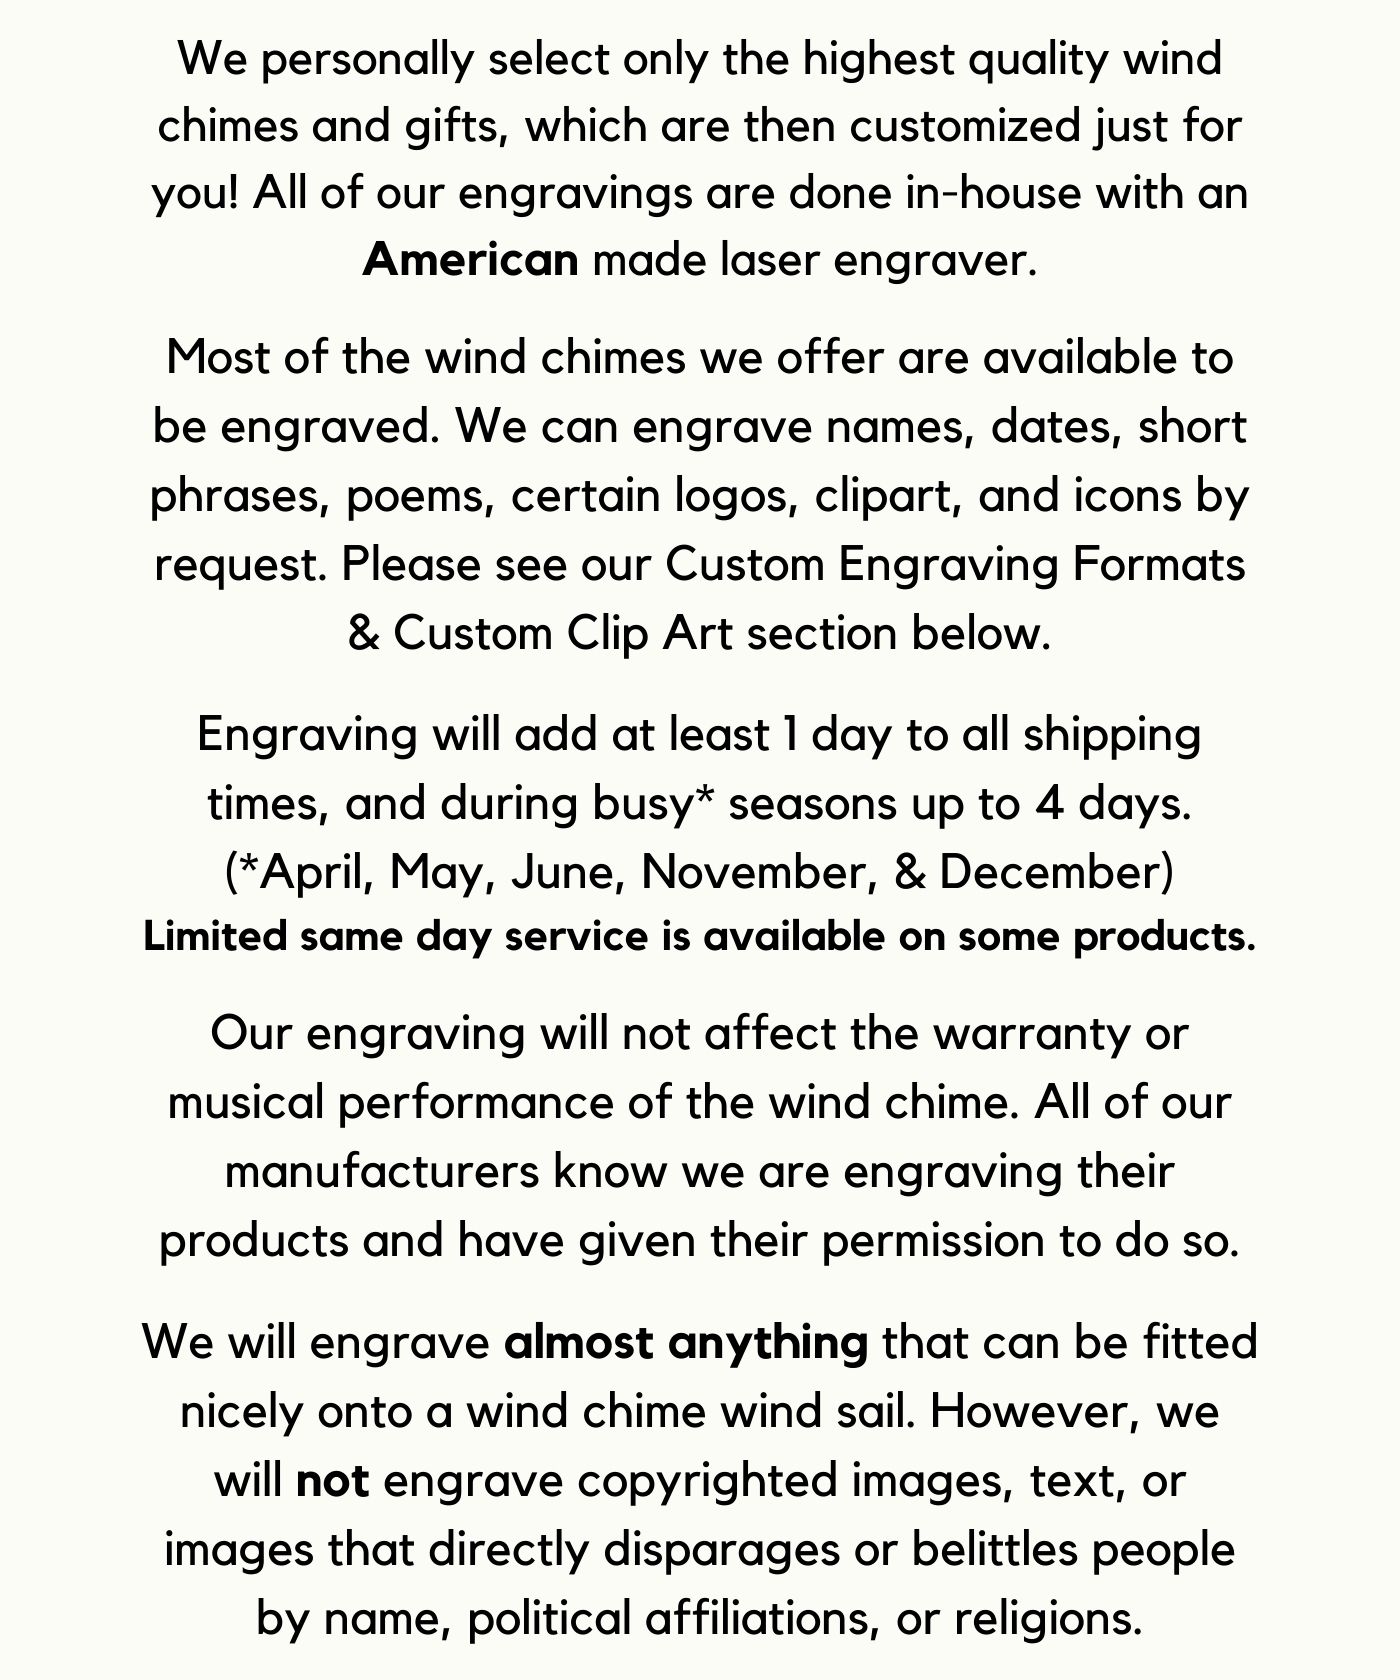 We personally select only the highest quality wind chimes and gifts, which are then customized just for you! All of our engravings are done in-house with an American made laser engraver. Most of the wind chimes we offer are available to be engraved. We can engrave names, dates, short phrases, poems, certain logos, clipart, and icons by request. Please see our Custom Engraving Formats & Custom Clip Art section below. Engraving will add at least 1 day to all shipping times, and during busy* seasons up to 4 days.
(*April, May, June, November, & December)
Limited same day service is available on some products. Our engraving will not affect the warranty or musical performance of the wind chime. All of our manufacturers know we are engraving their products and have given their permission to do so. We will engrave almost anything that can be fitted nicely onto a wind chime wind sail. However, we will not engrave copyrighted images, text, or images that directly disparages or belittles people by name, political affiliations, or religions.